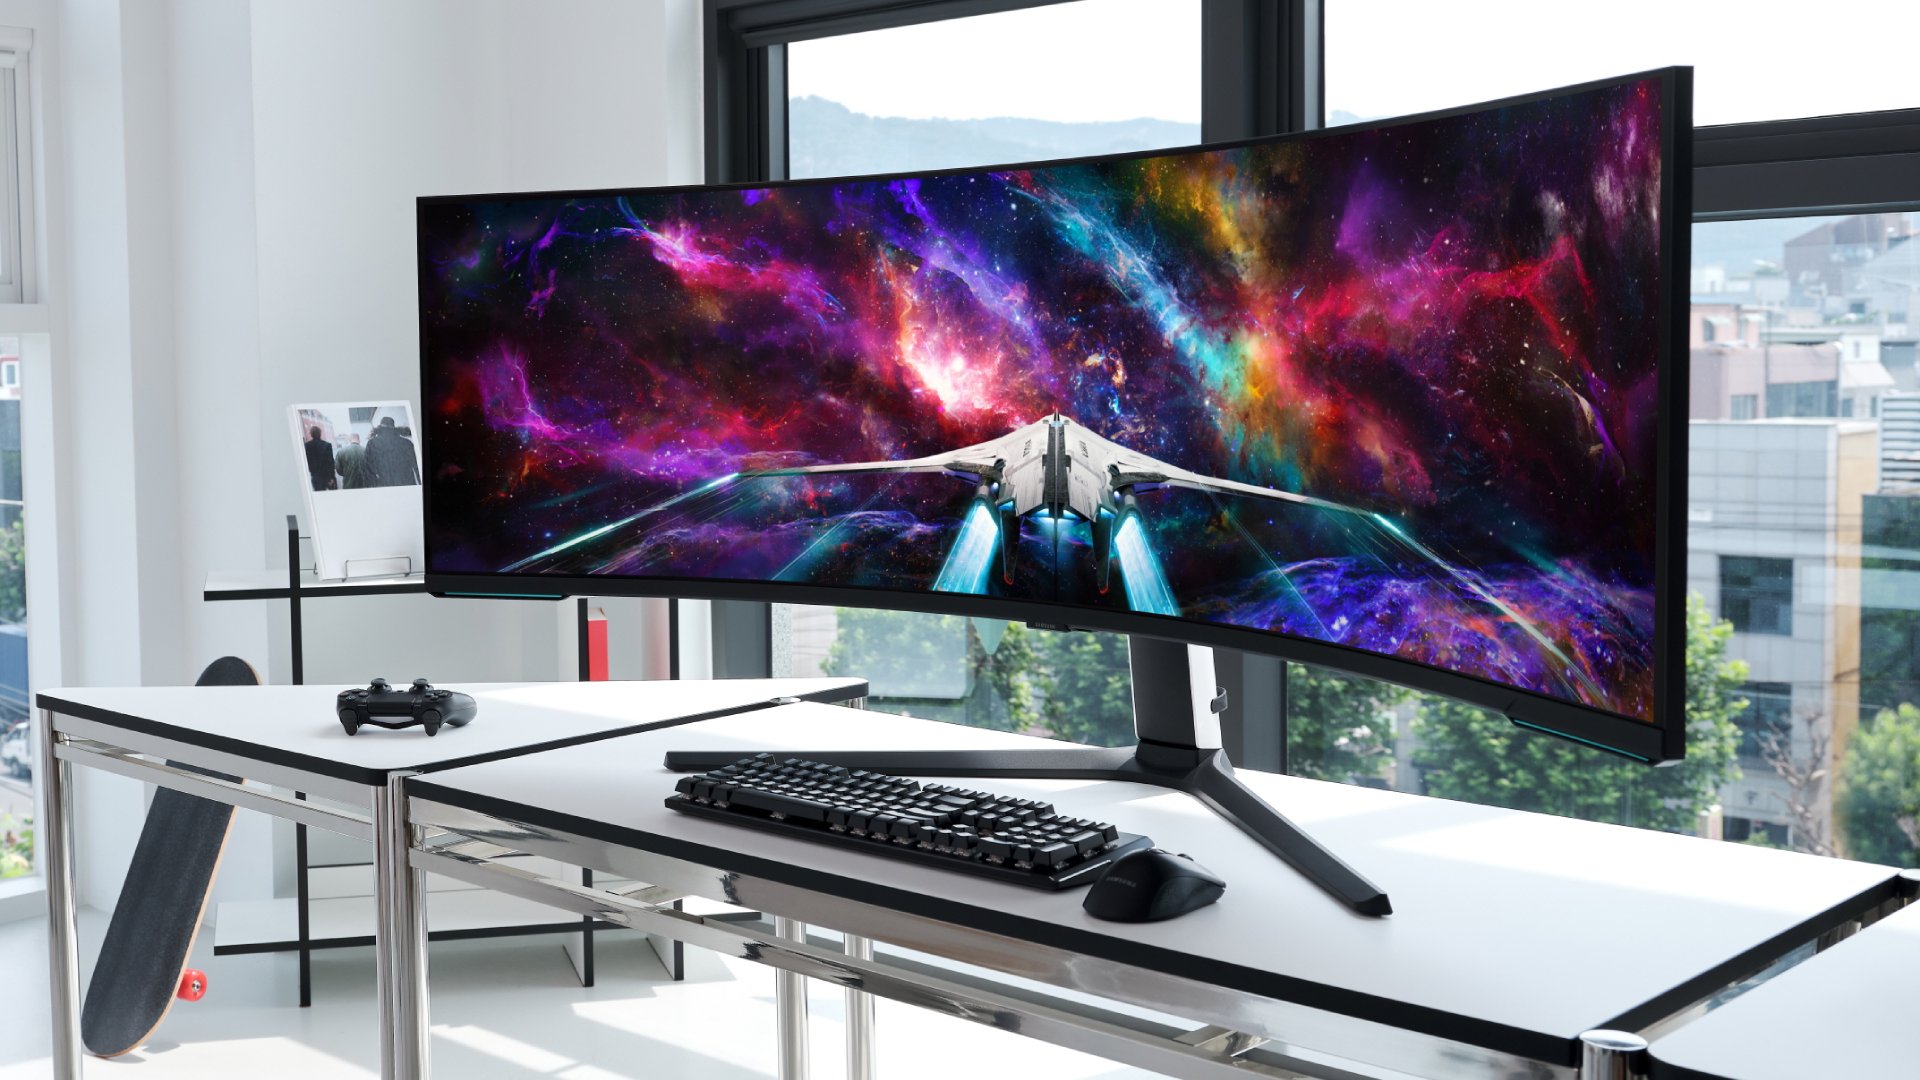  Place your order for Samsung's absurdly awesome dual-4K $2,000 mega-monitor 